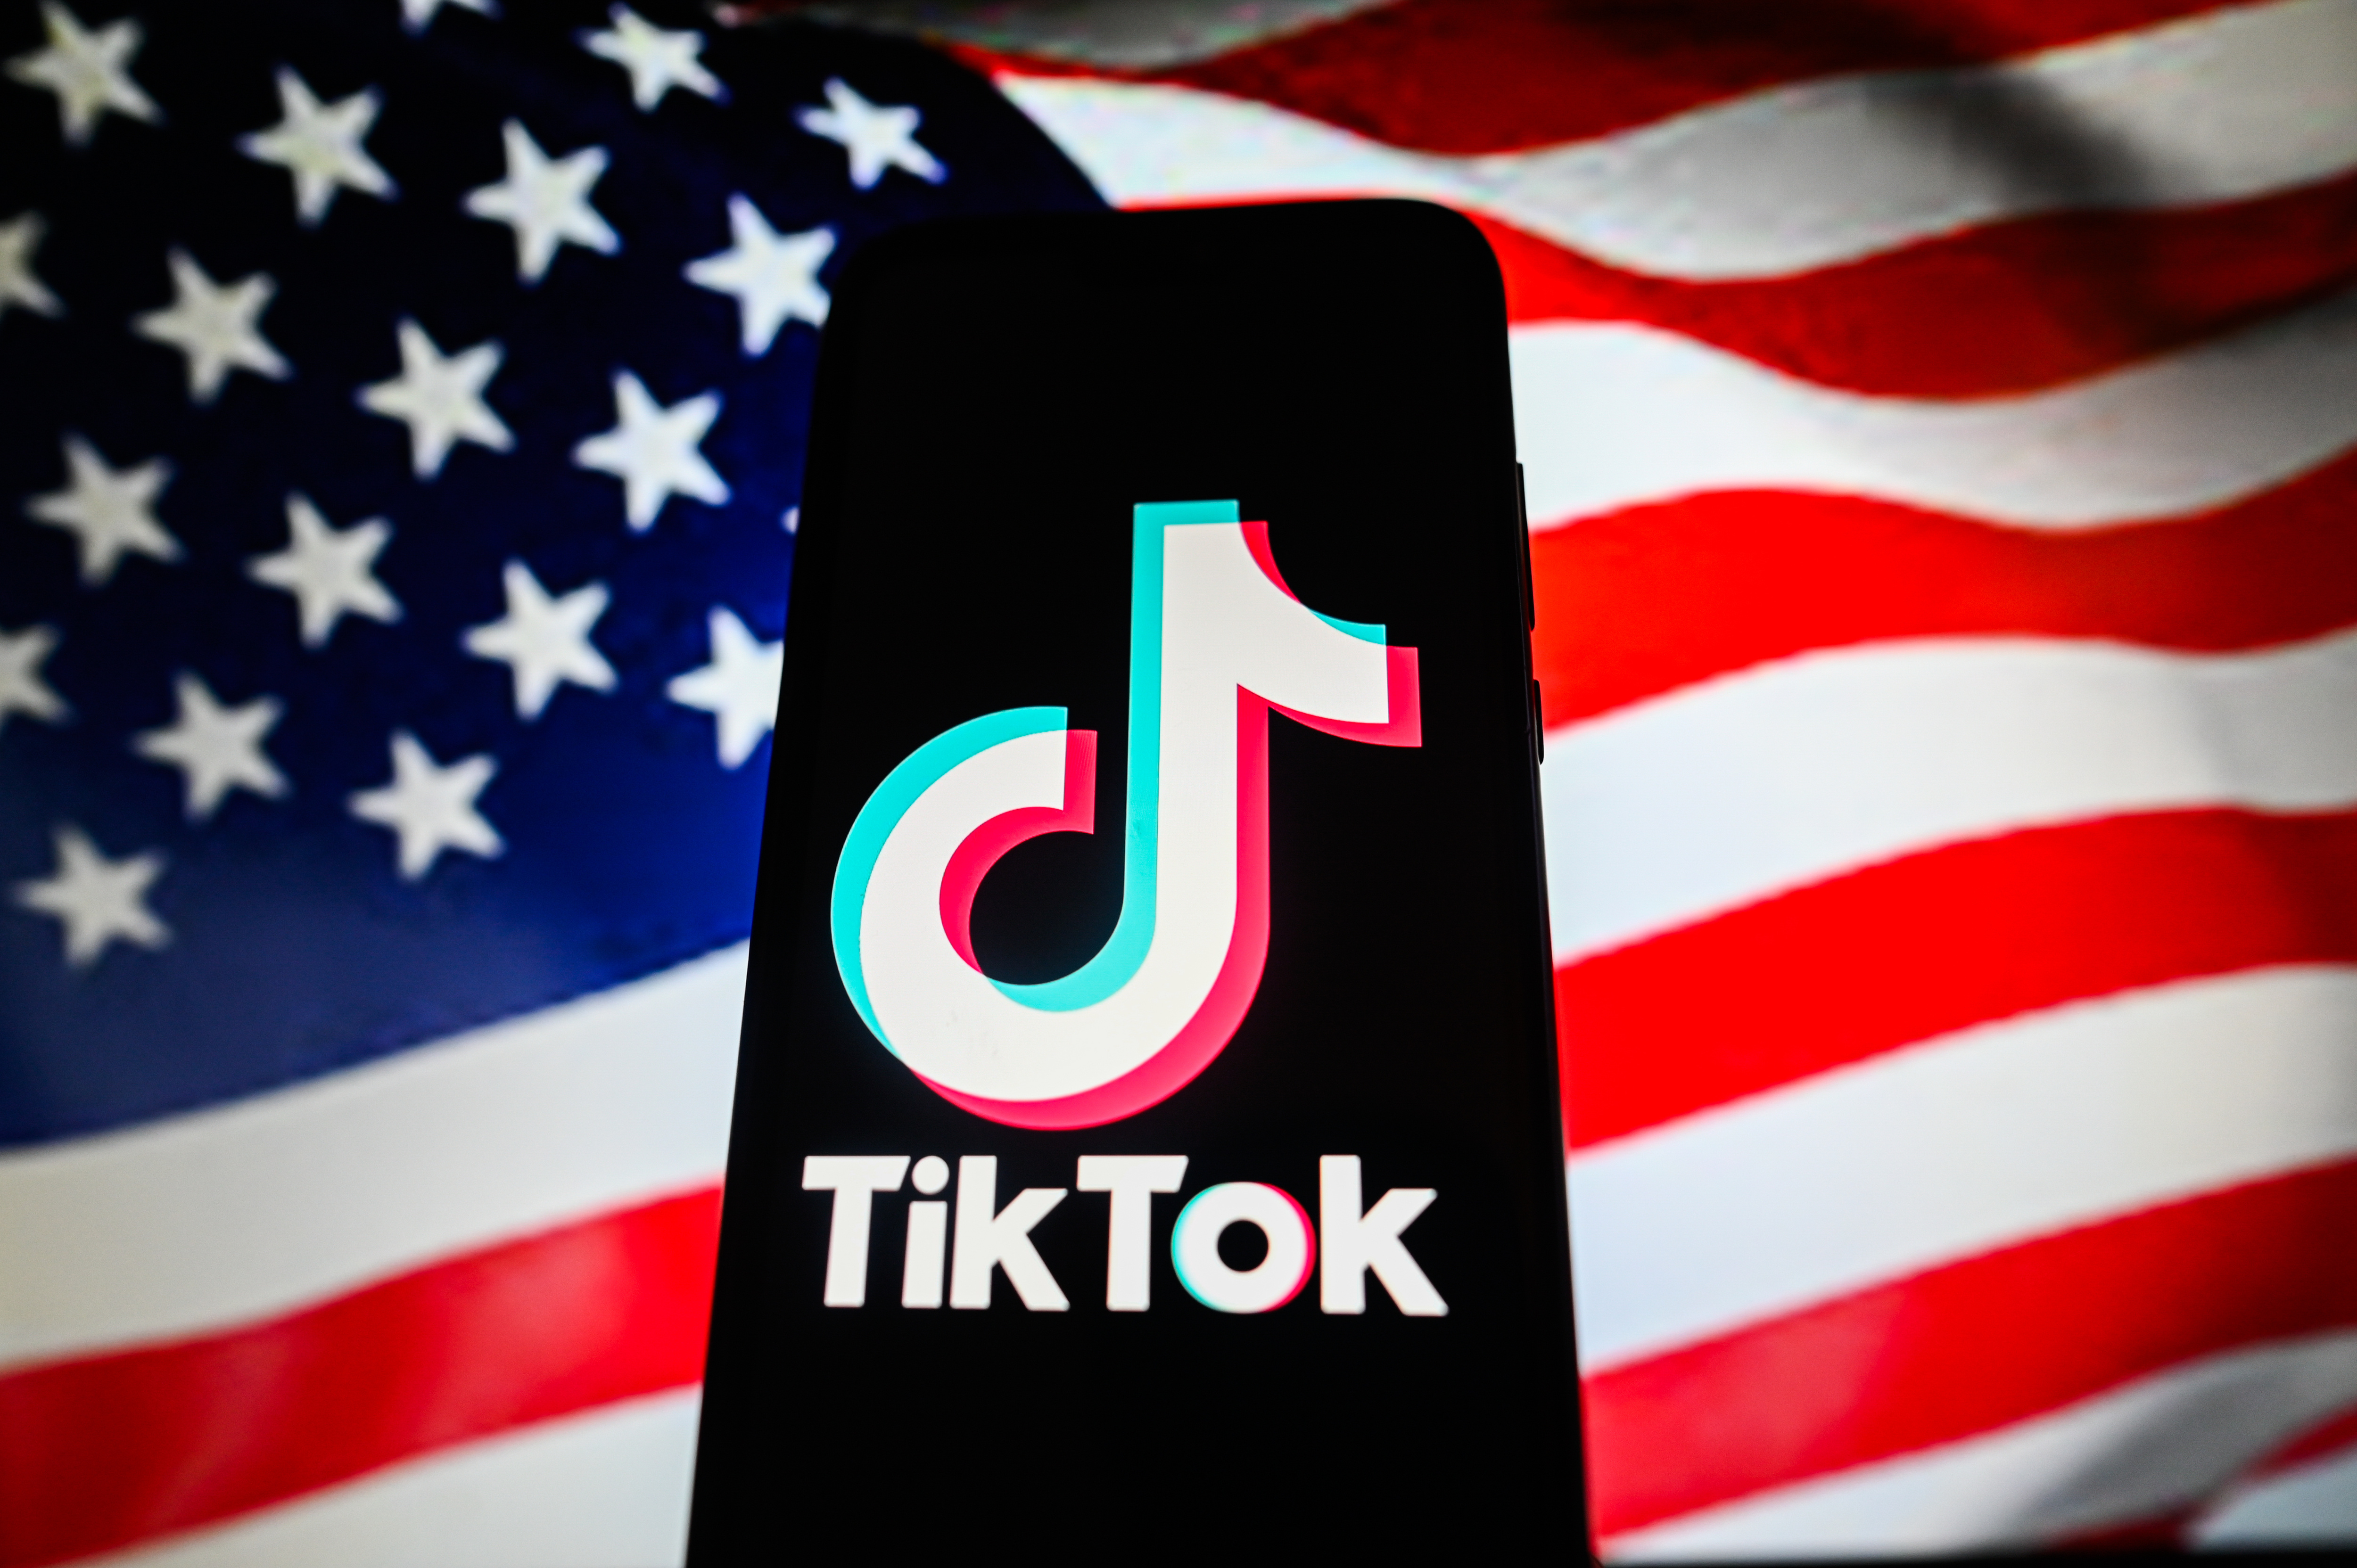 Big brands could pivot easily if TikTok goes away. For many small
businesses, it's another story